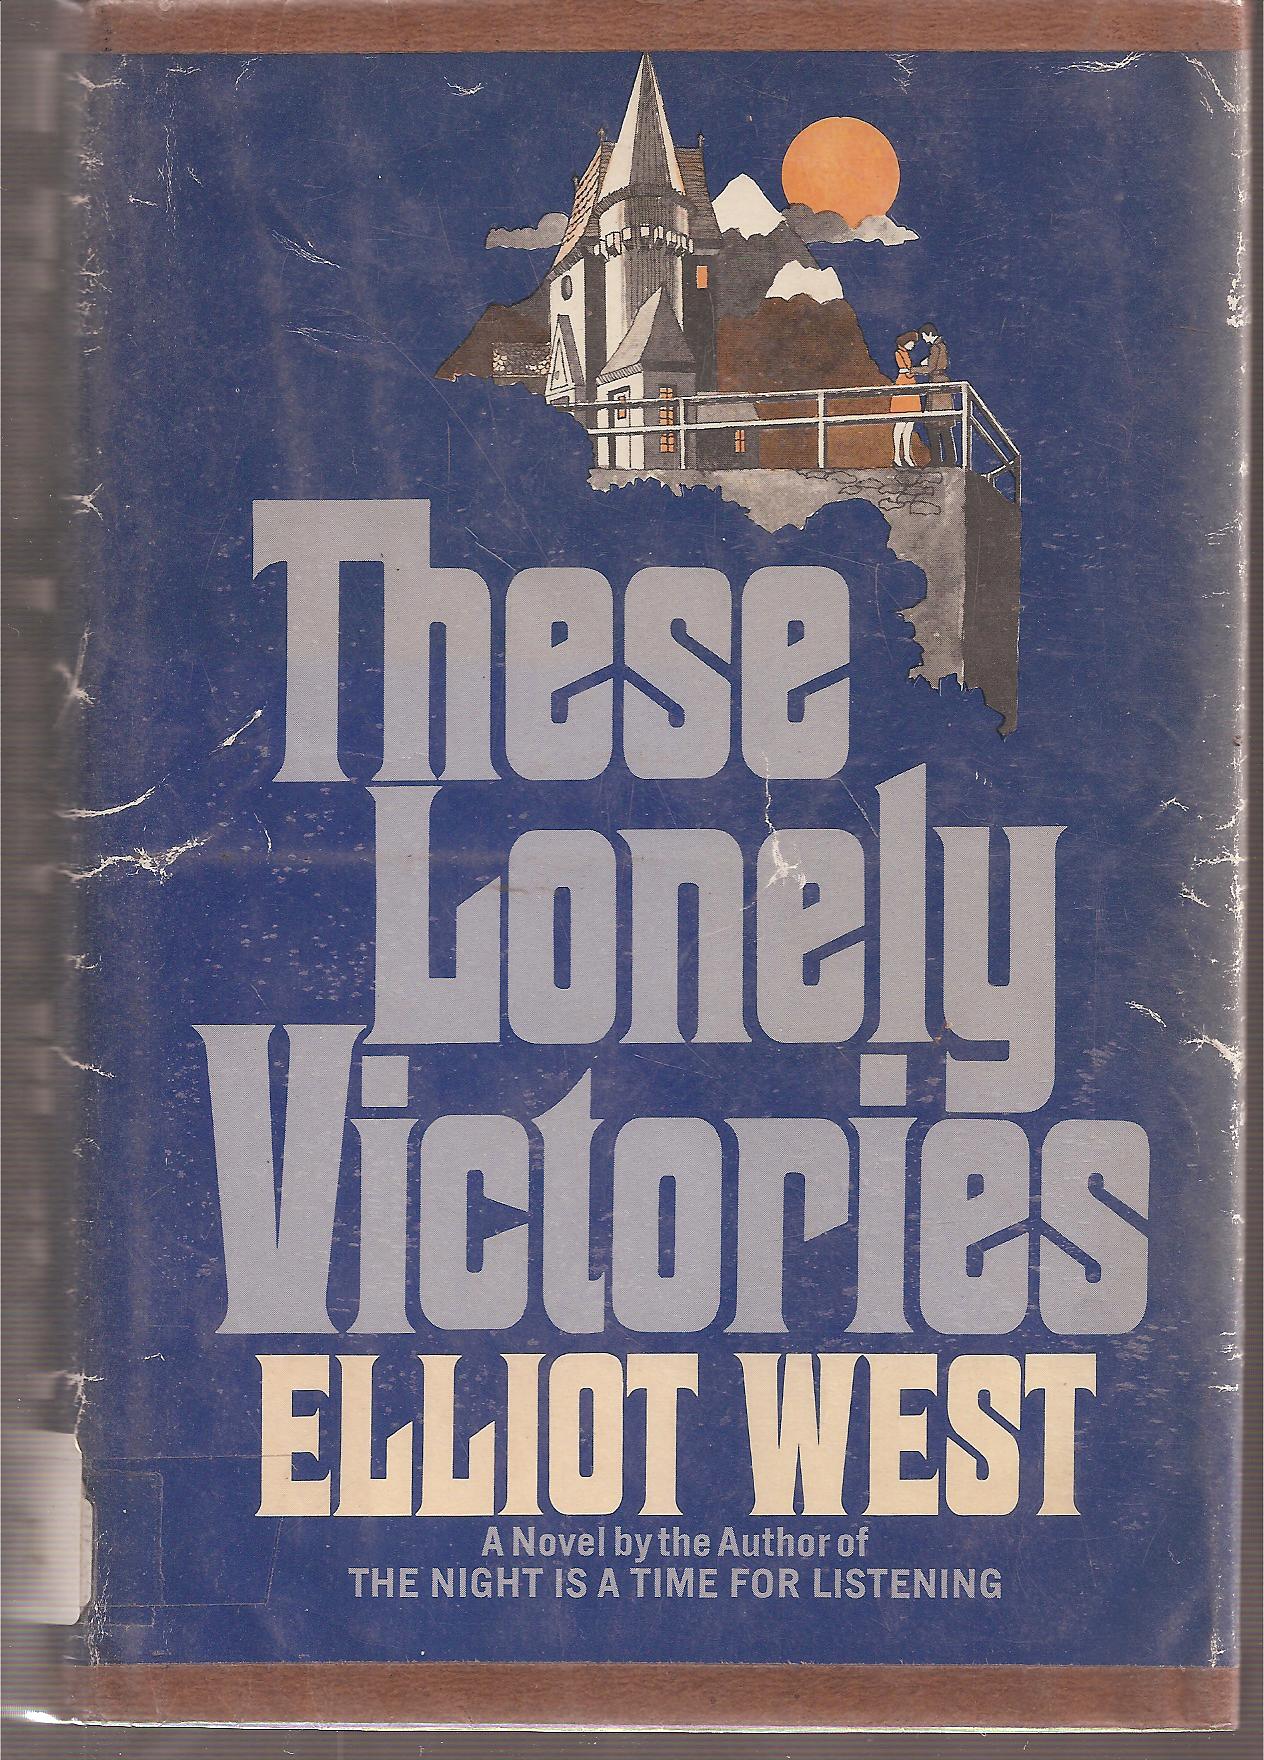 West, Elliot  These Lonely Victories 